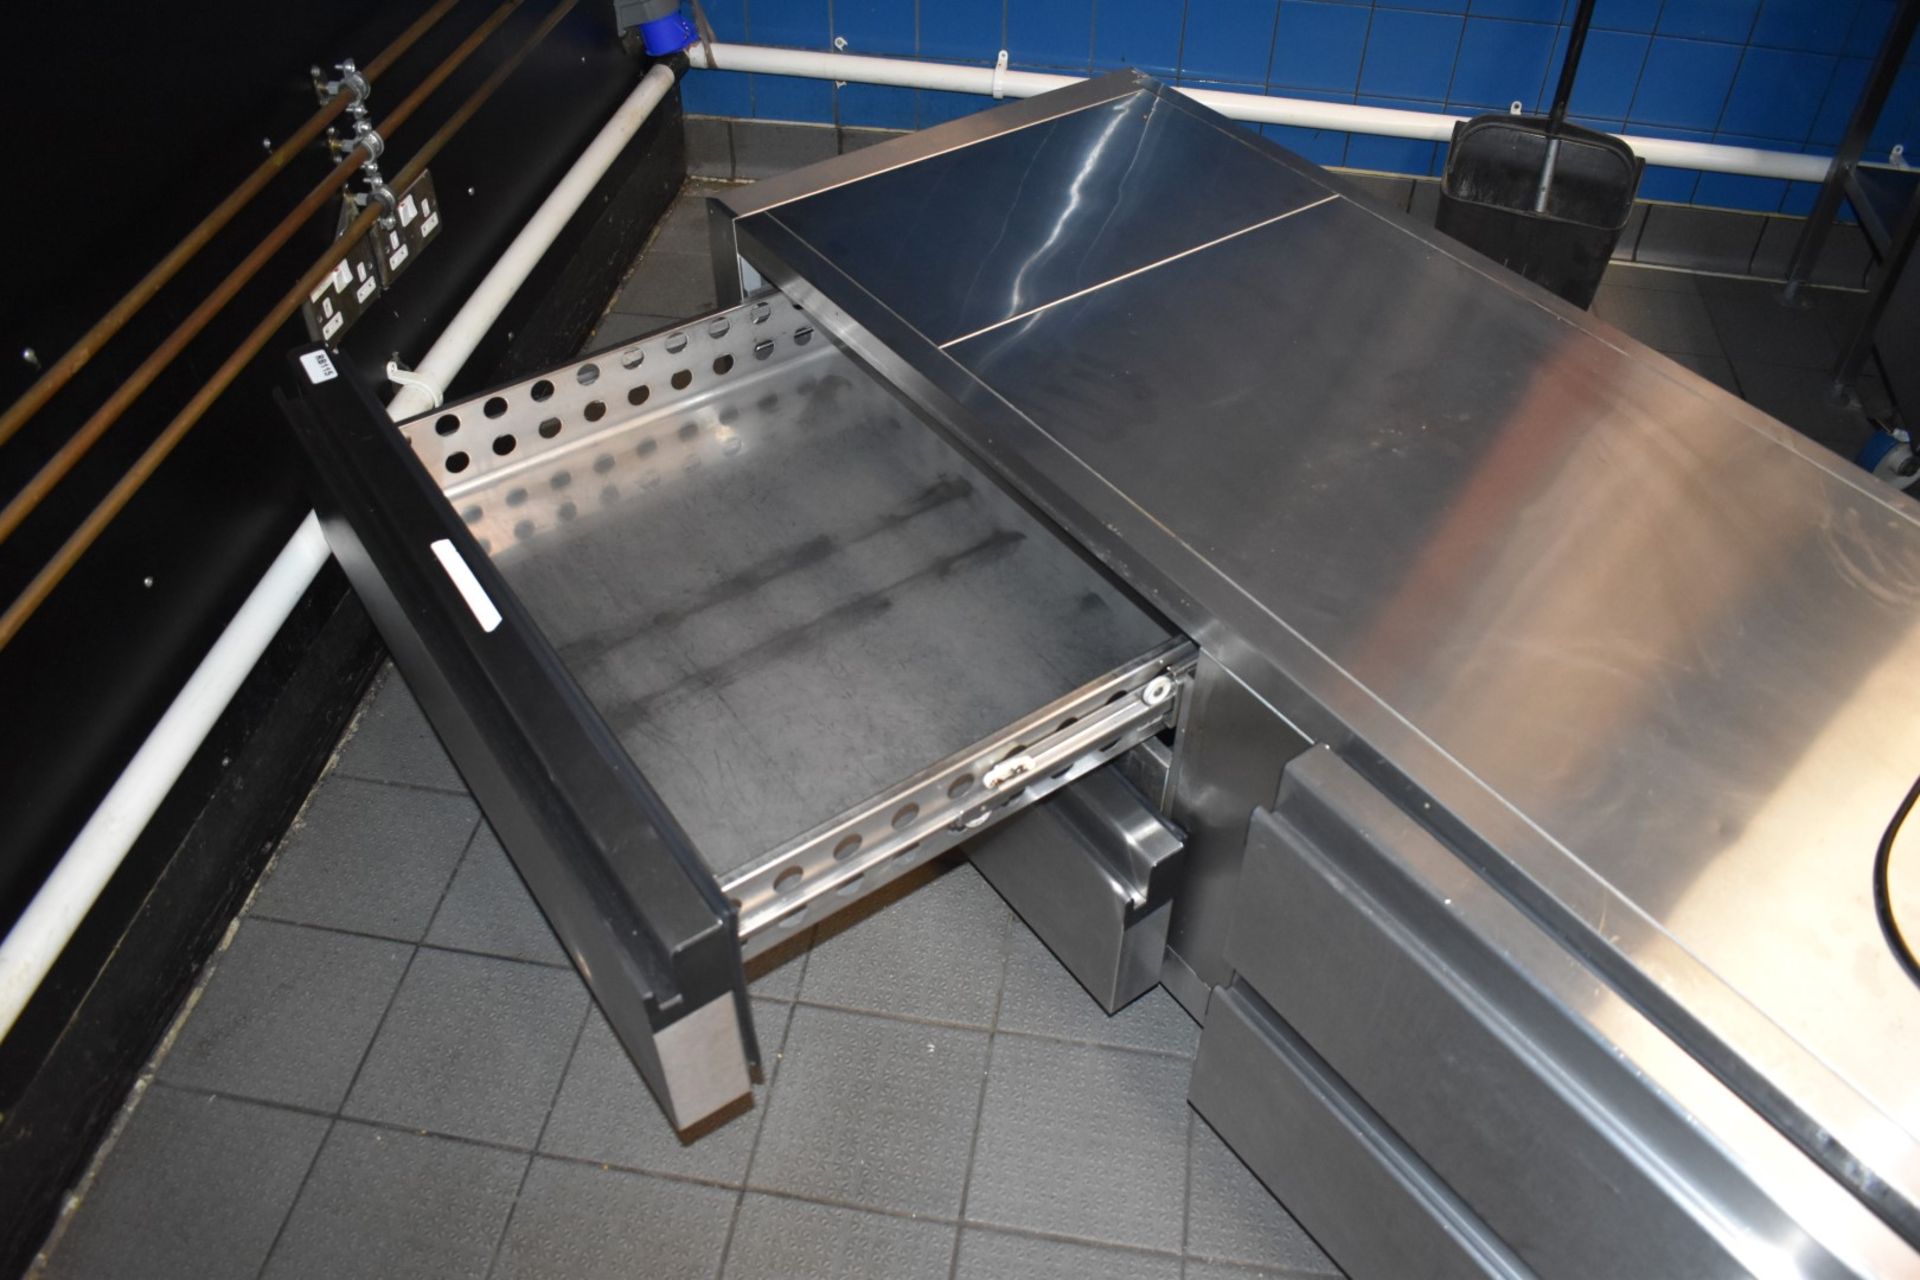 1 x Precision HUBC422 Under Broiler Refrigerated Counter - RRP £3,900 - Size H54 x W200 x D67 - Image 3 of 4